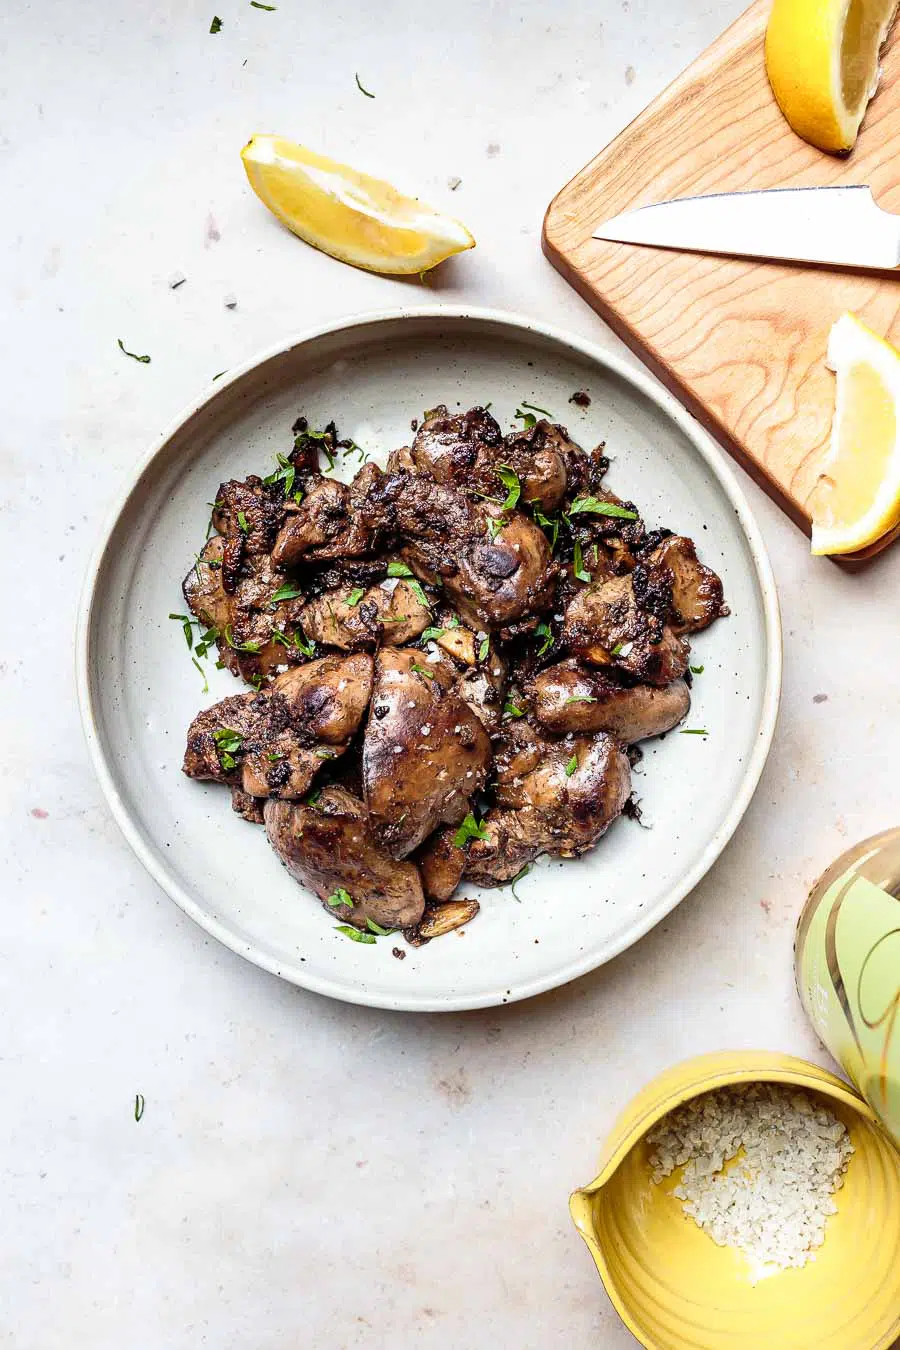 sautéed lemon garlic chicken liver with fresh parsley and lemon wedges on a stoneware plate with a cutting board, knife, and lemon in the background